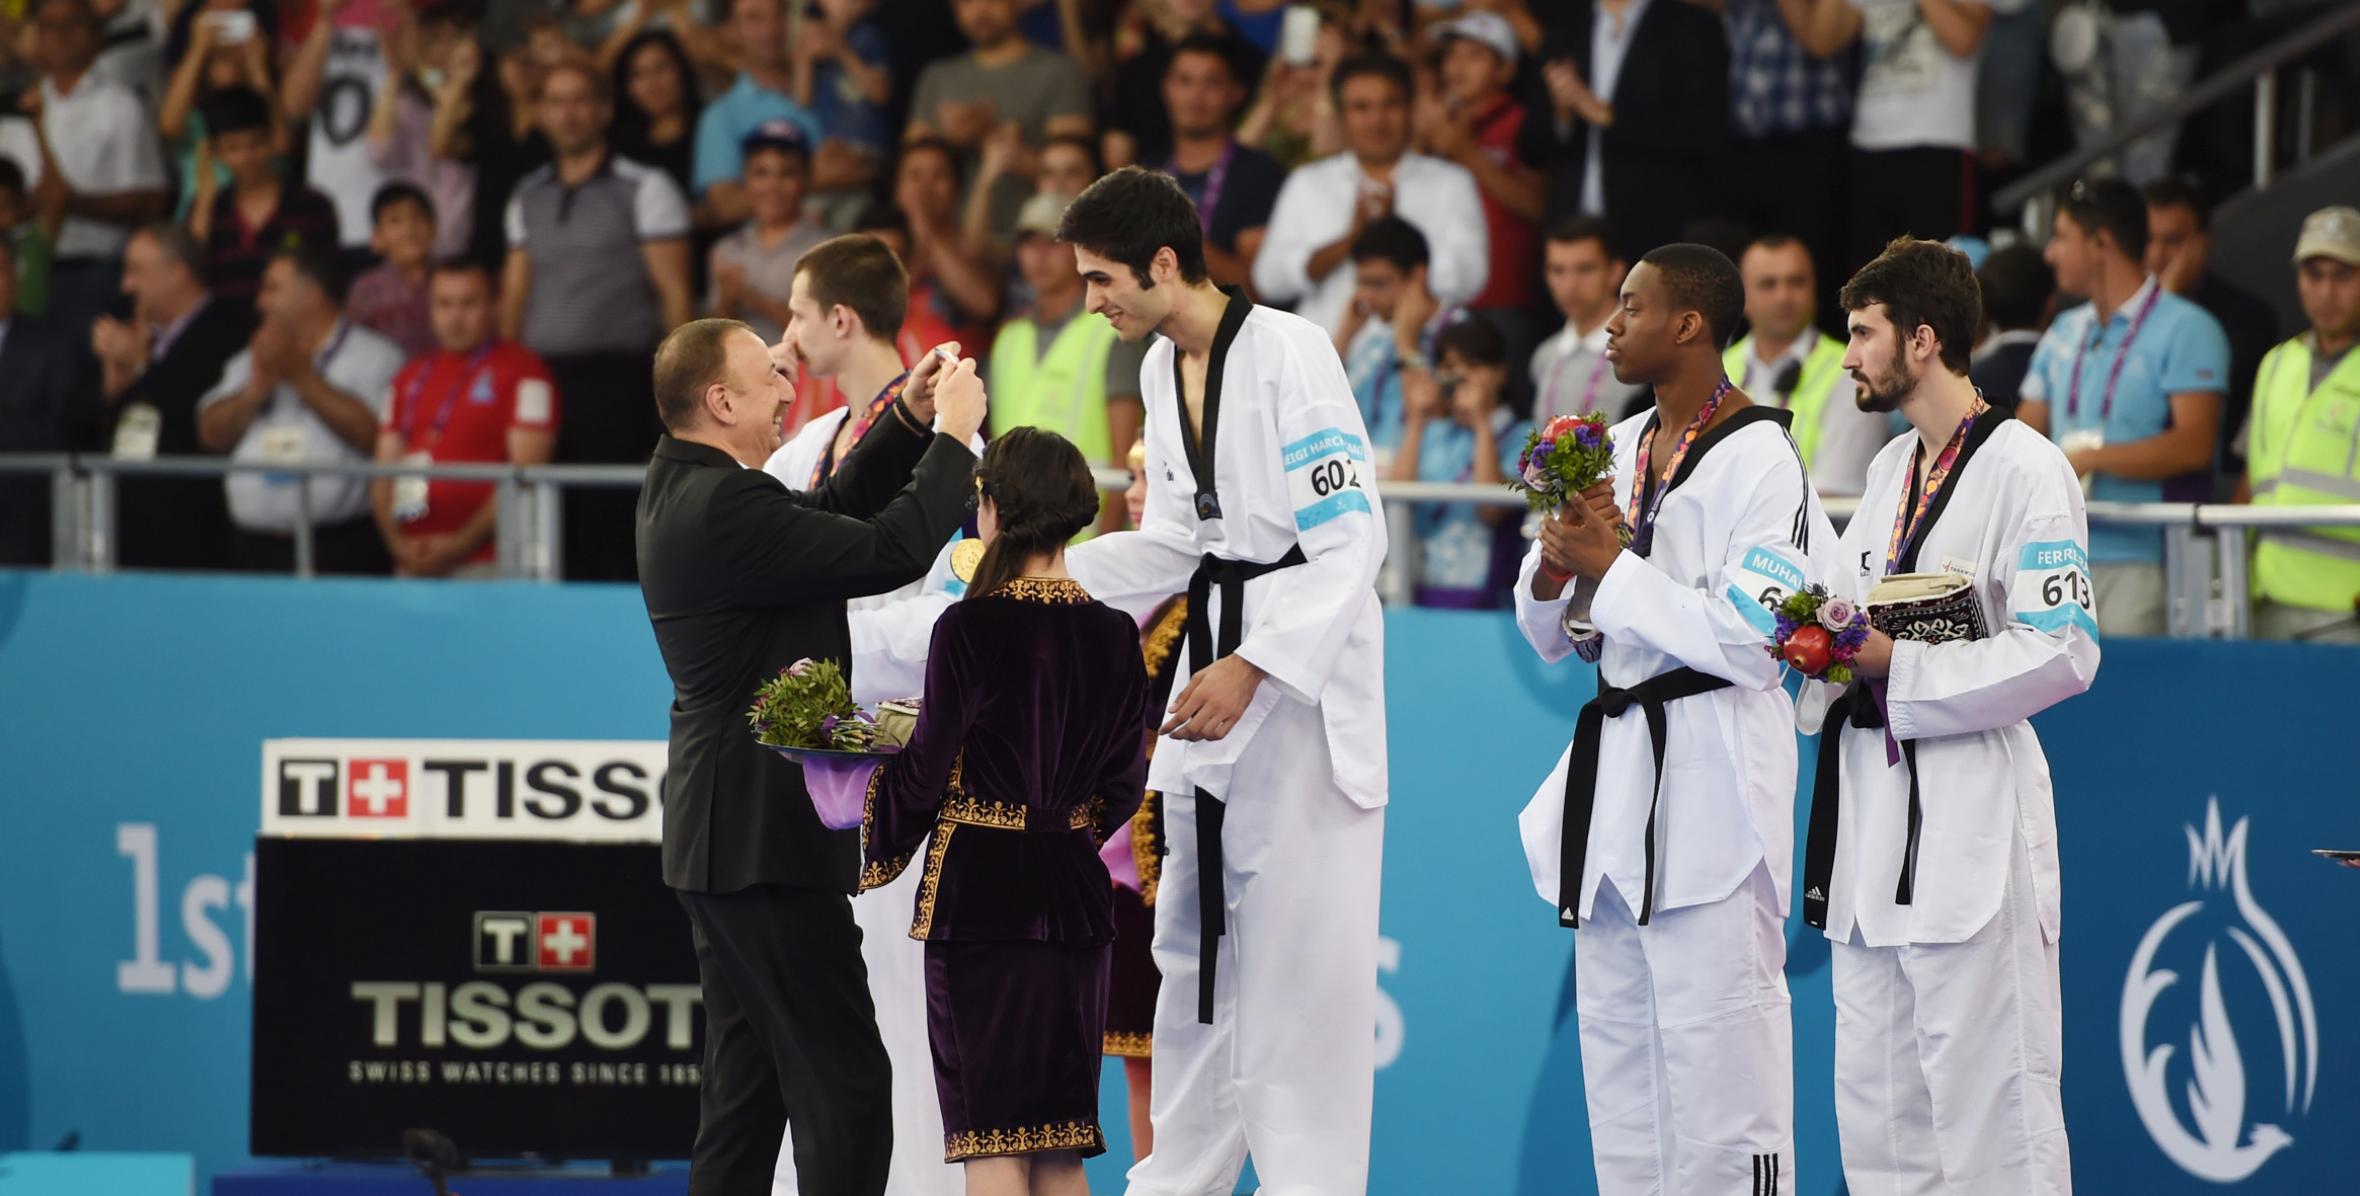 Ilham Aliyev presented the gold medal to the champion